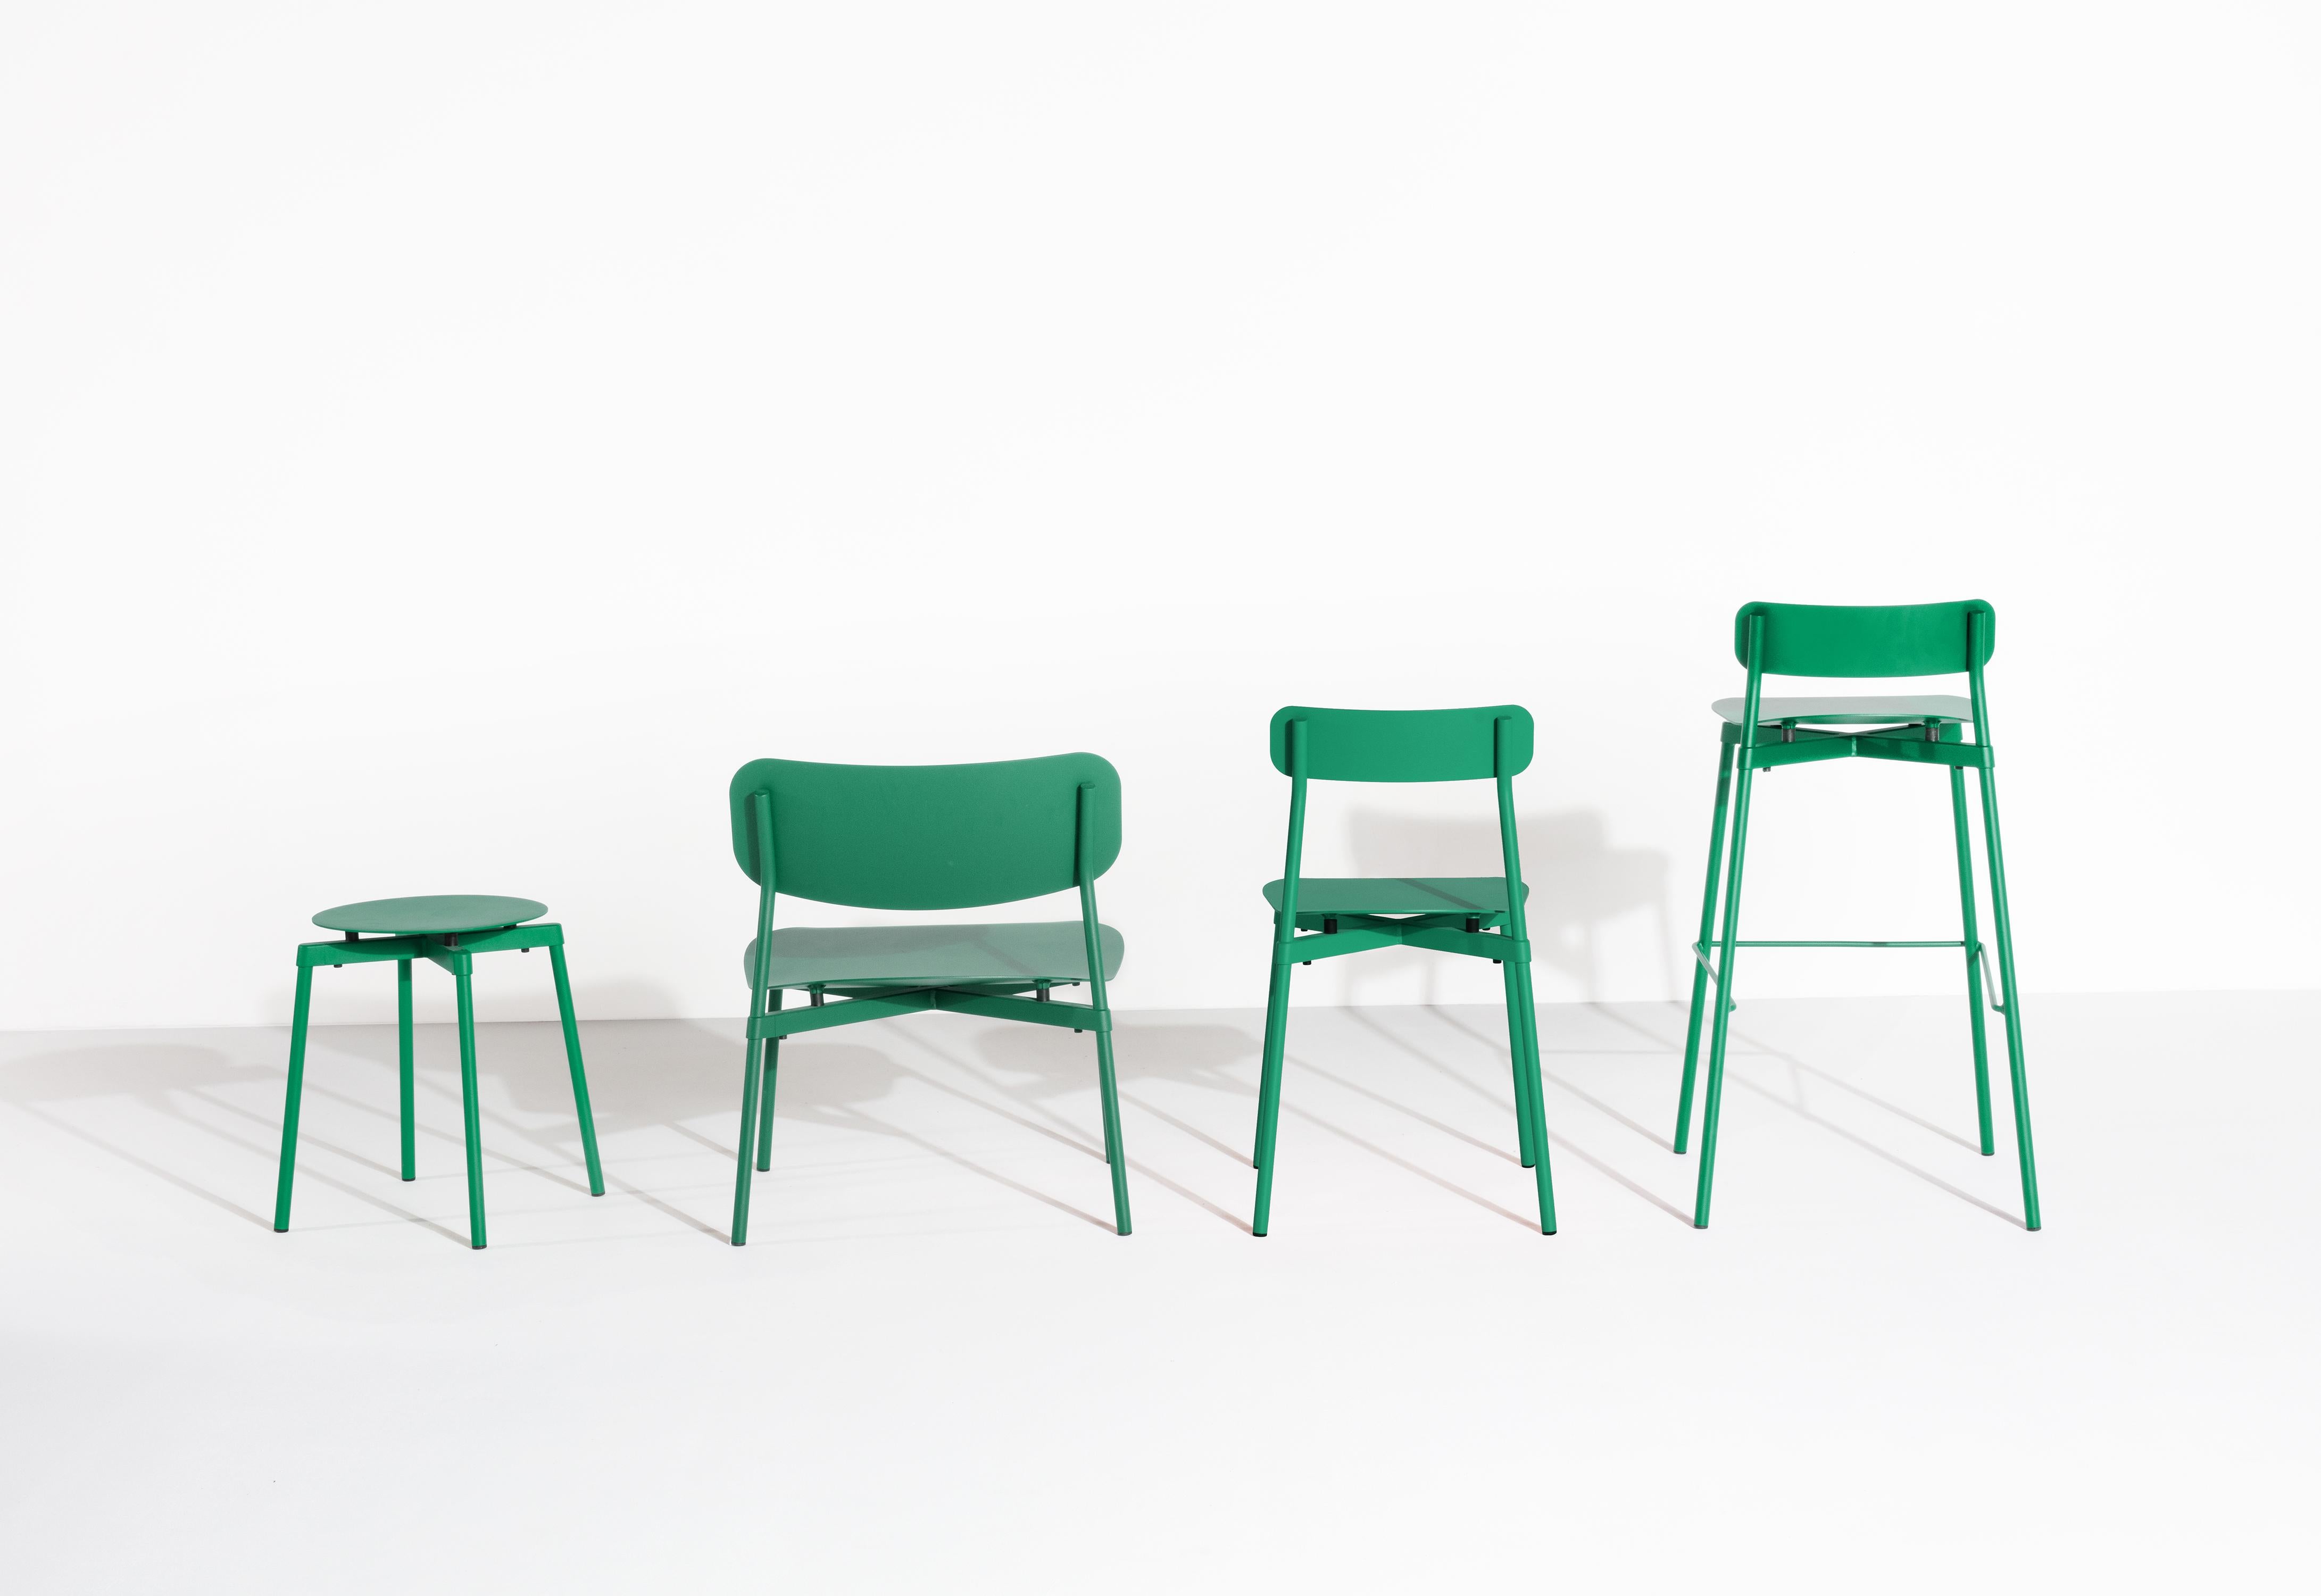 Aluminum Petite Friture Fromme Stool in Mint-Green Aluminium by Tom Chung, 2020 For Sale